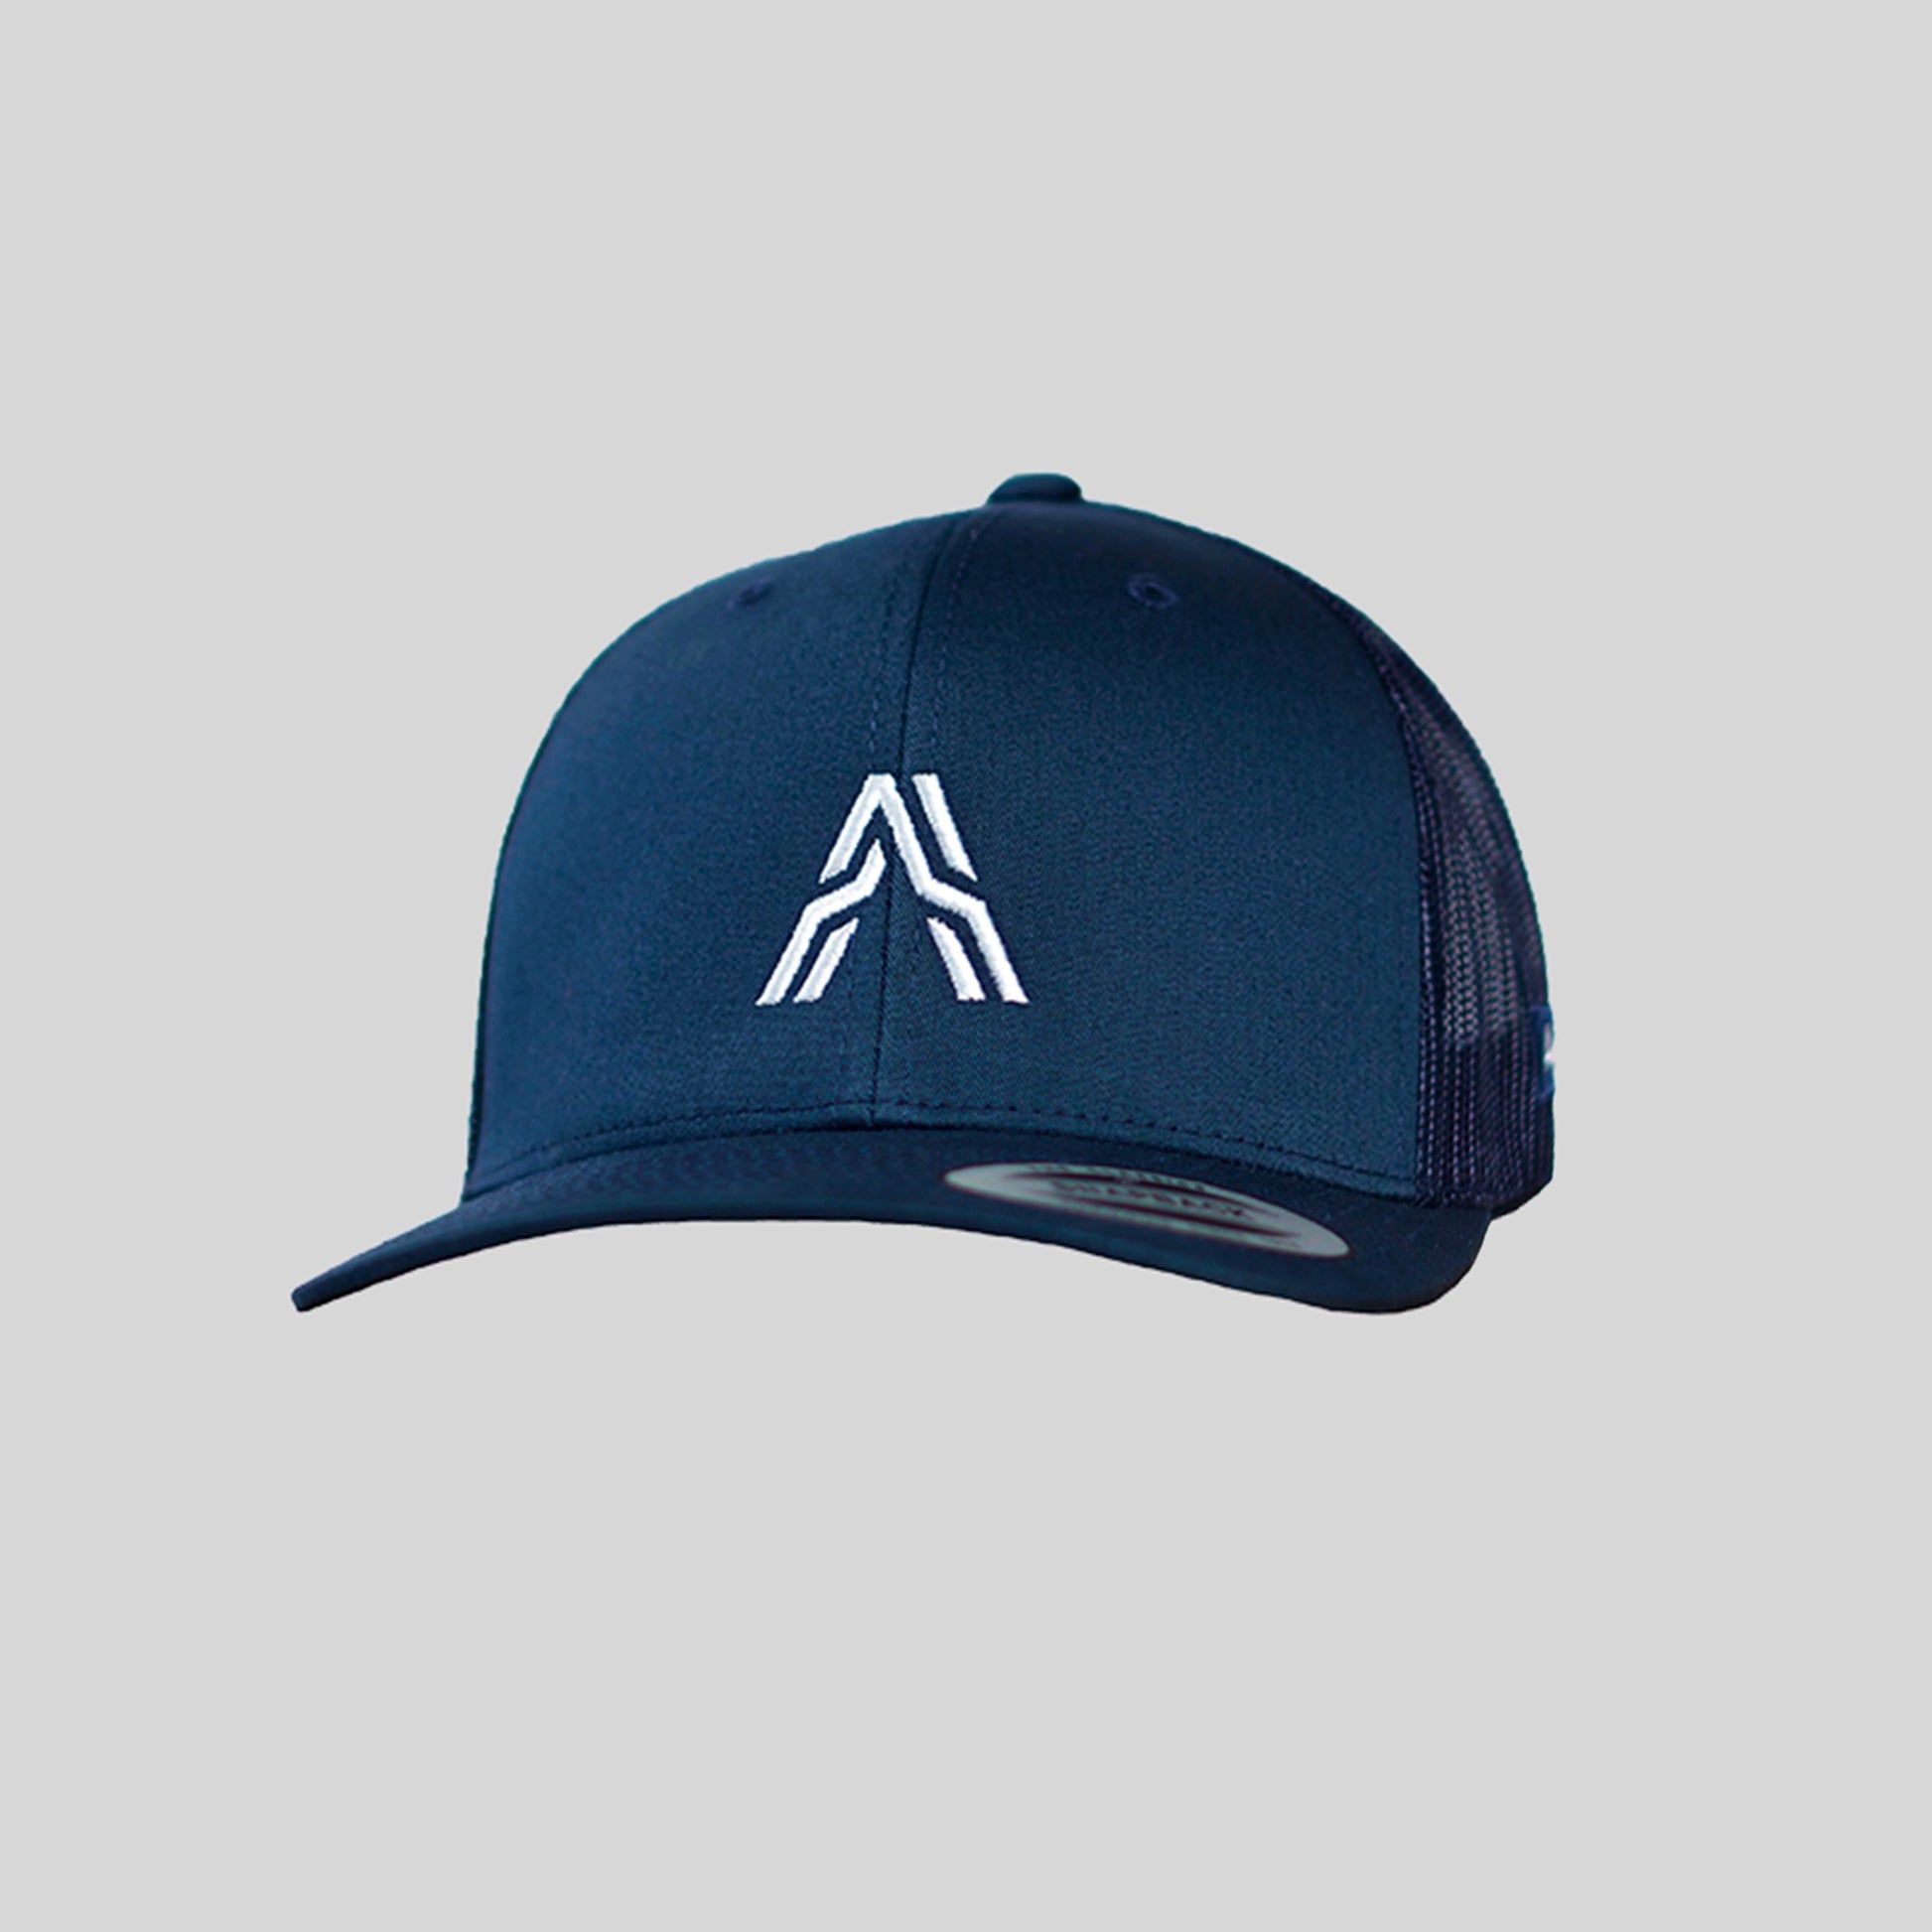 Embroidery Retro Trucker Cap Navy by Ascender Cycling Club Zürich Switzerland Front View